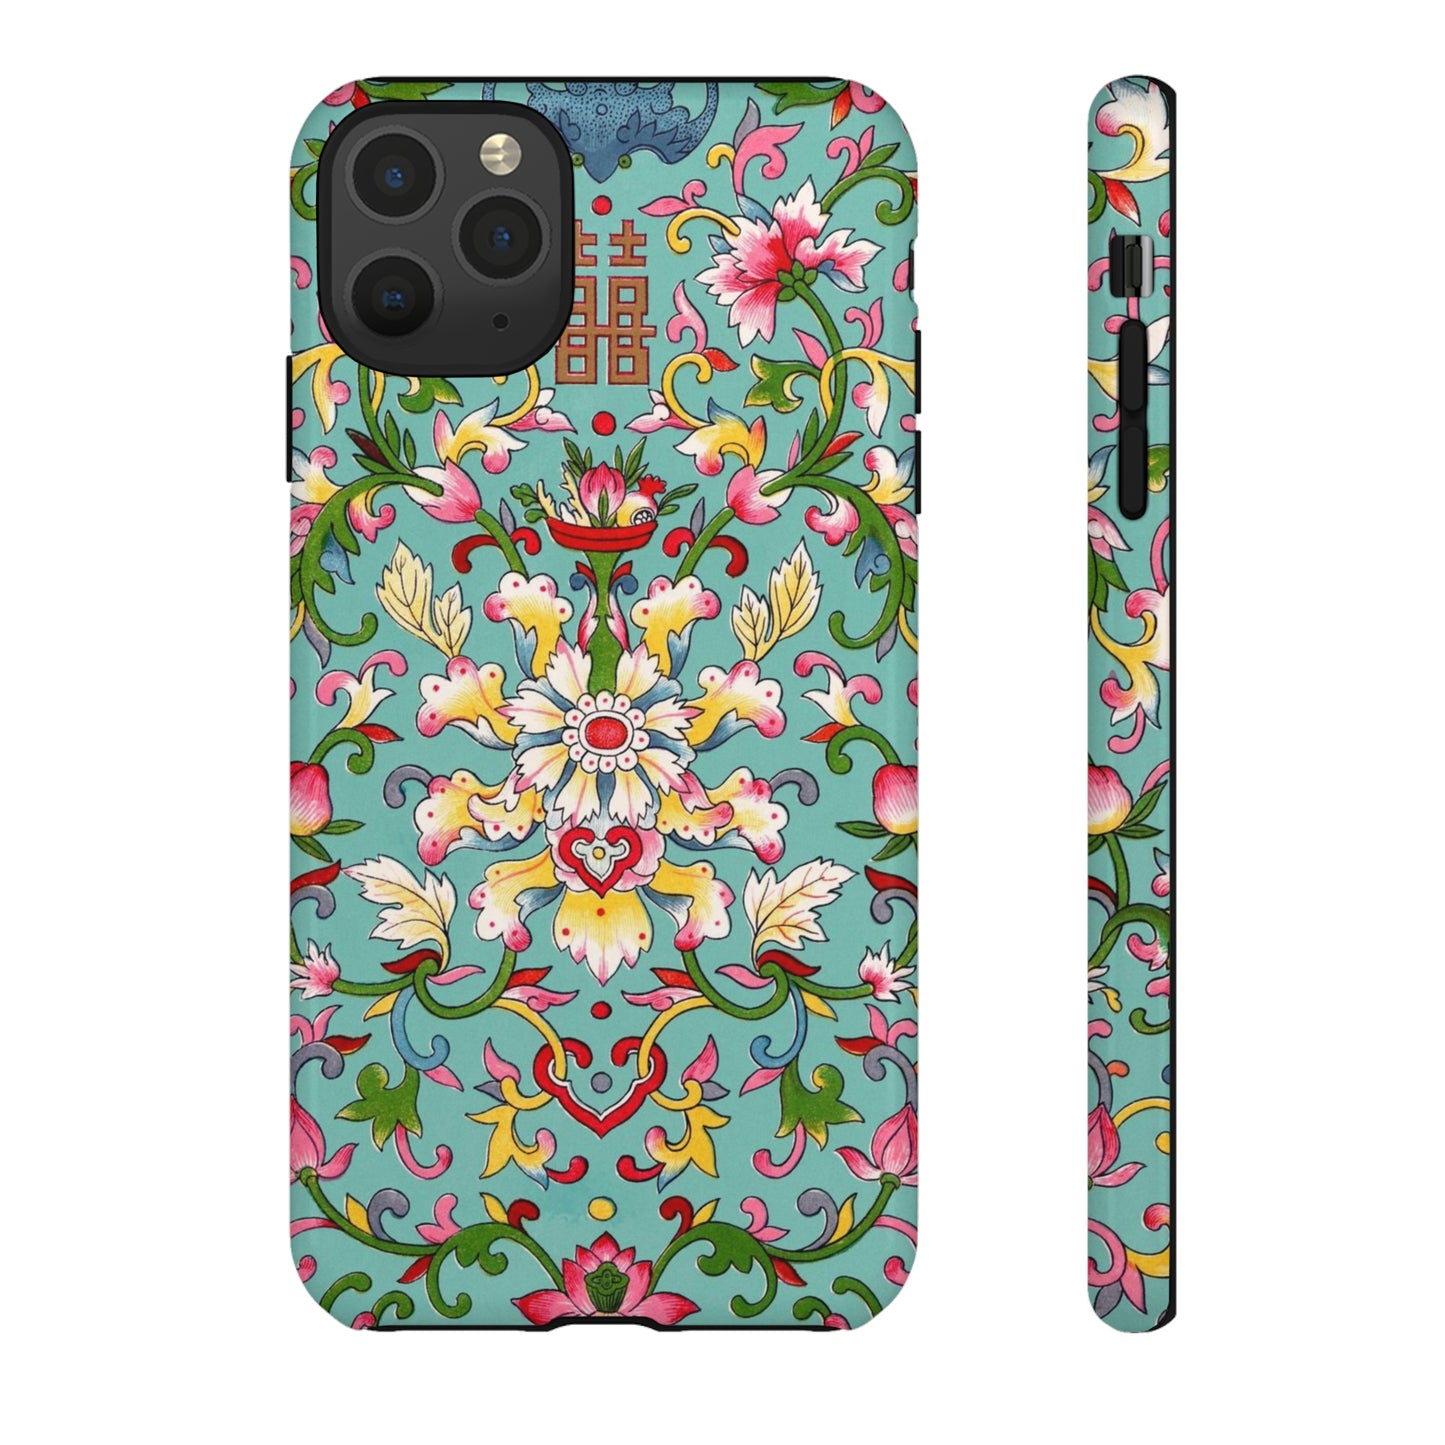 Floral Family Phone Case - BRYKNOLO LLC Phone Case iPhone 11 Pro Max / Glossy